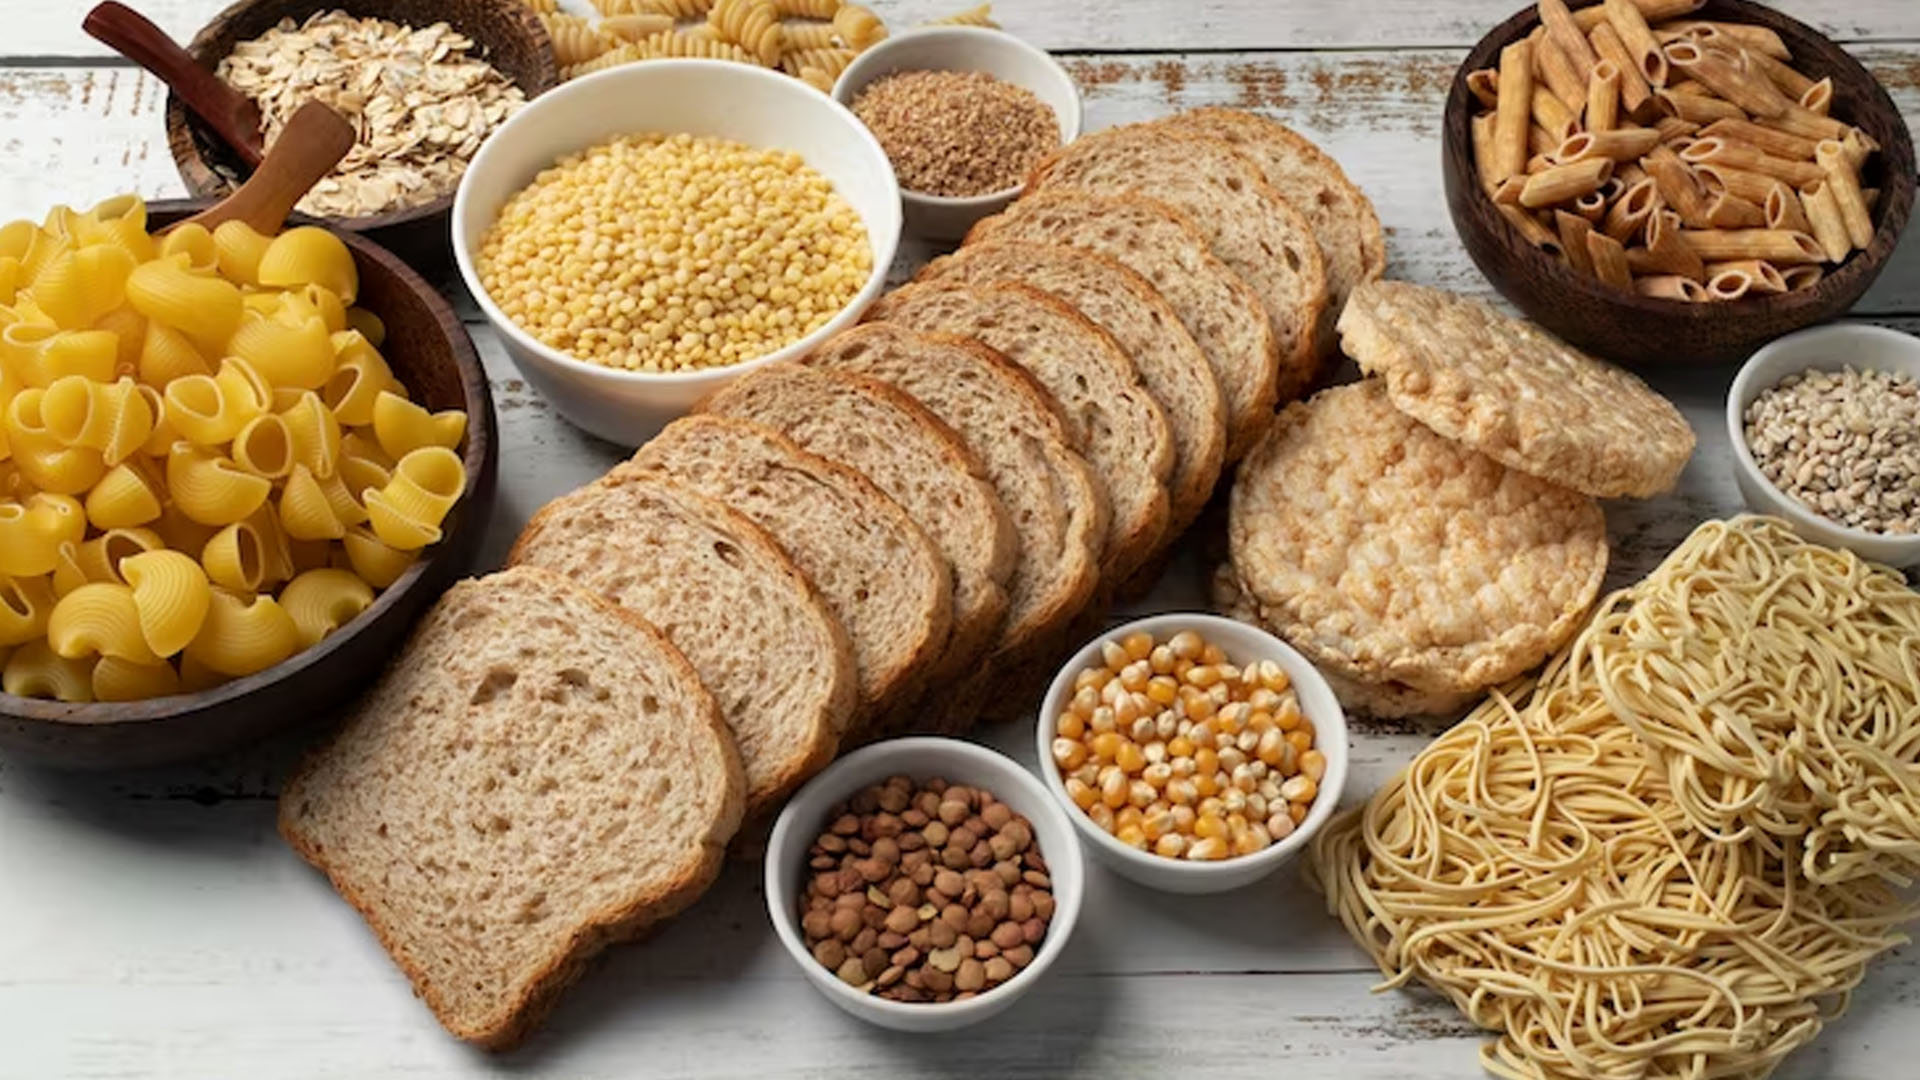 What Are The Health Benefits of Eating Wheat Foods?